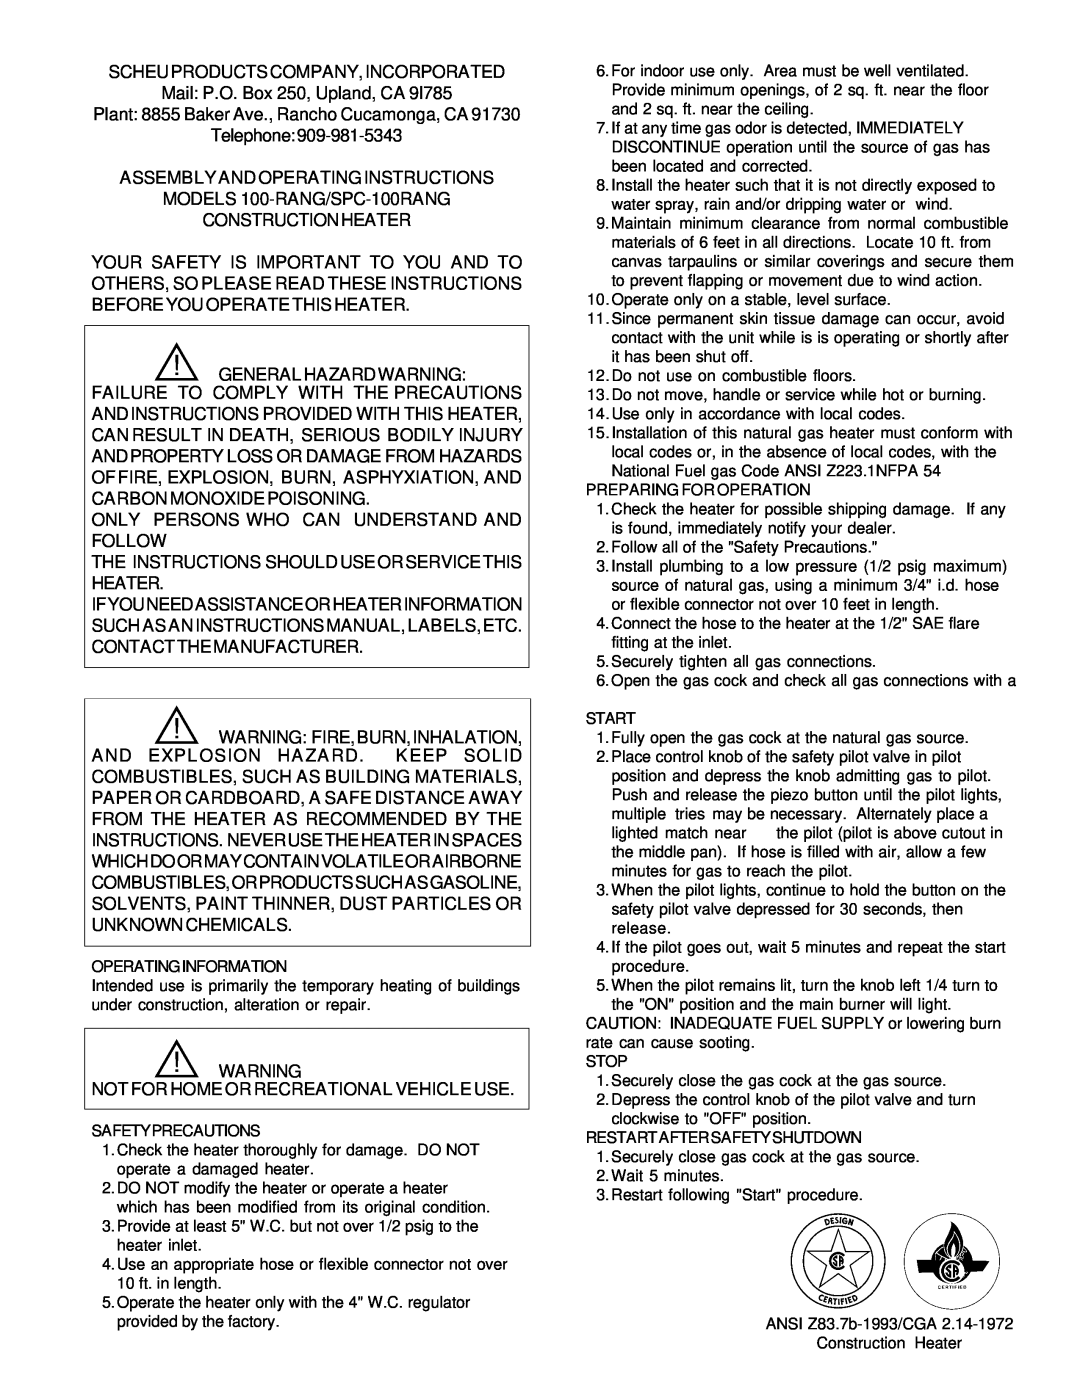 Coleman 100-RANG, SPC-100RANG operating instructions Scheuproductscompany,Incorporated 